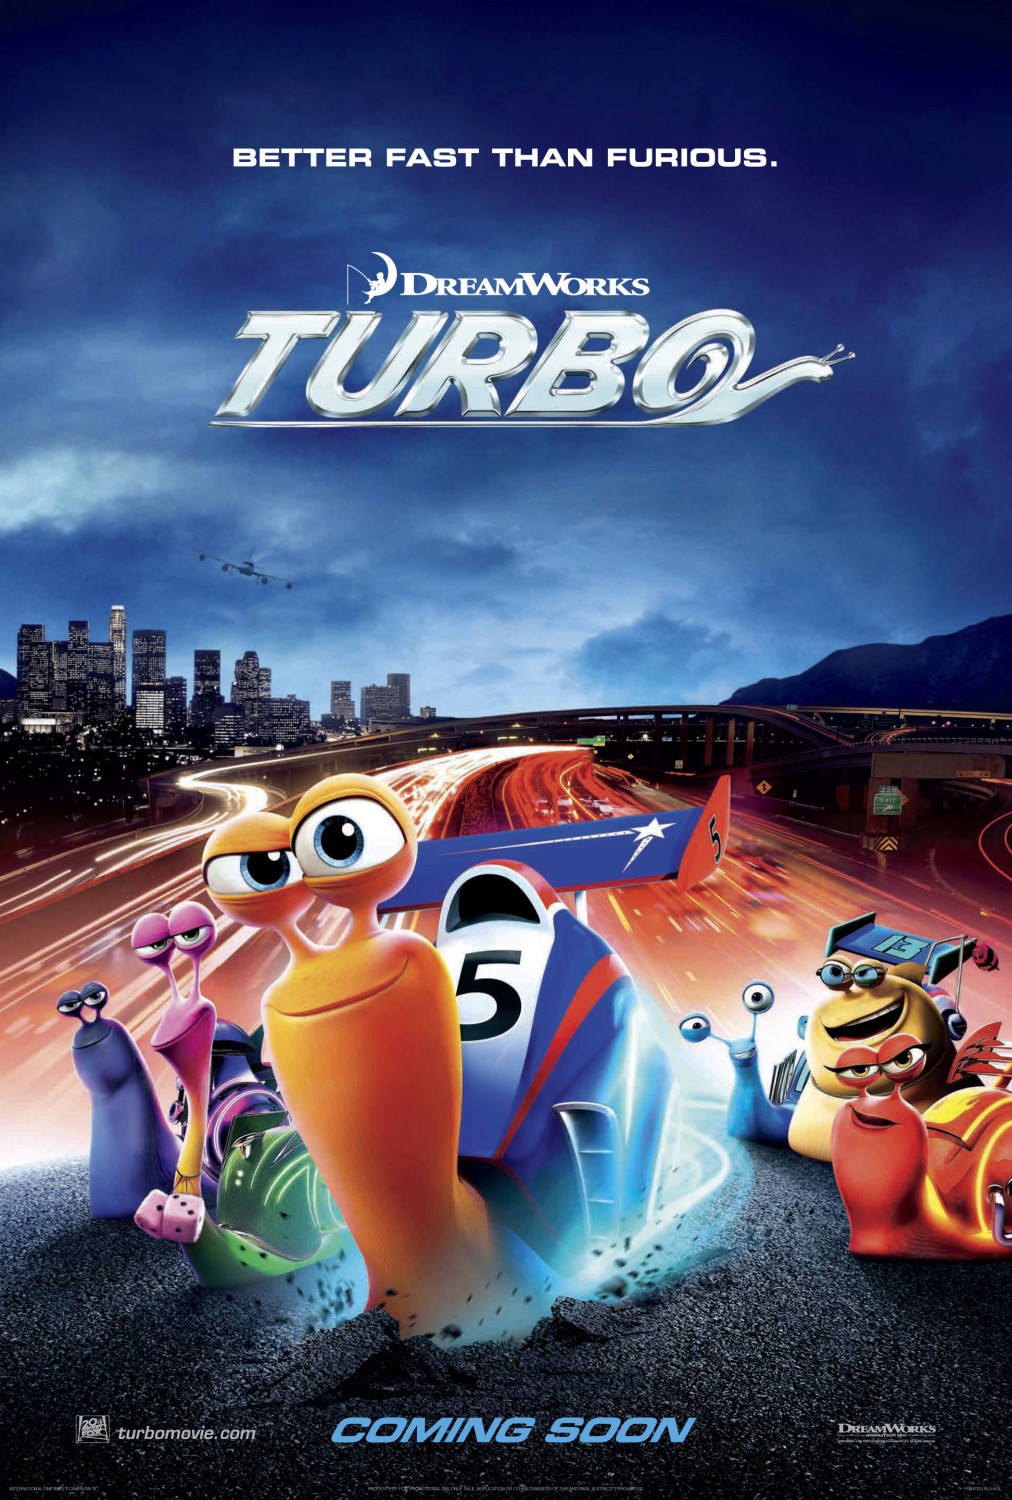 Extra Large Movie Poster Image for Turbo (#2 of 12)